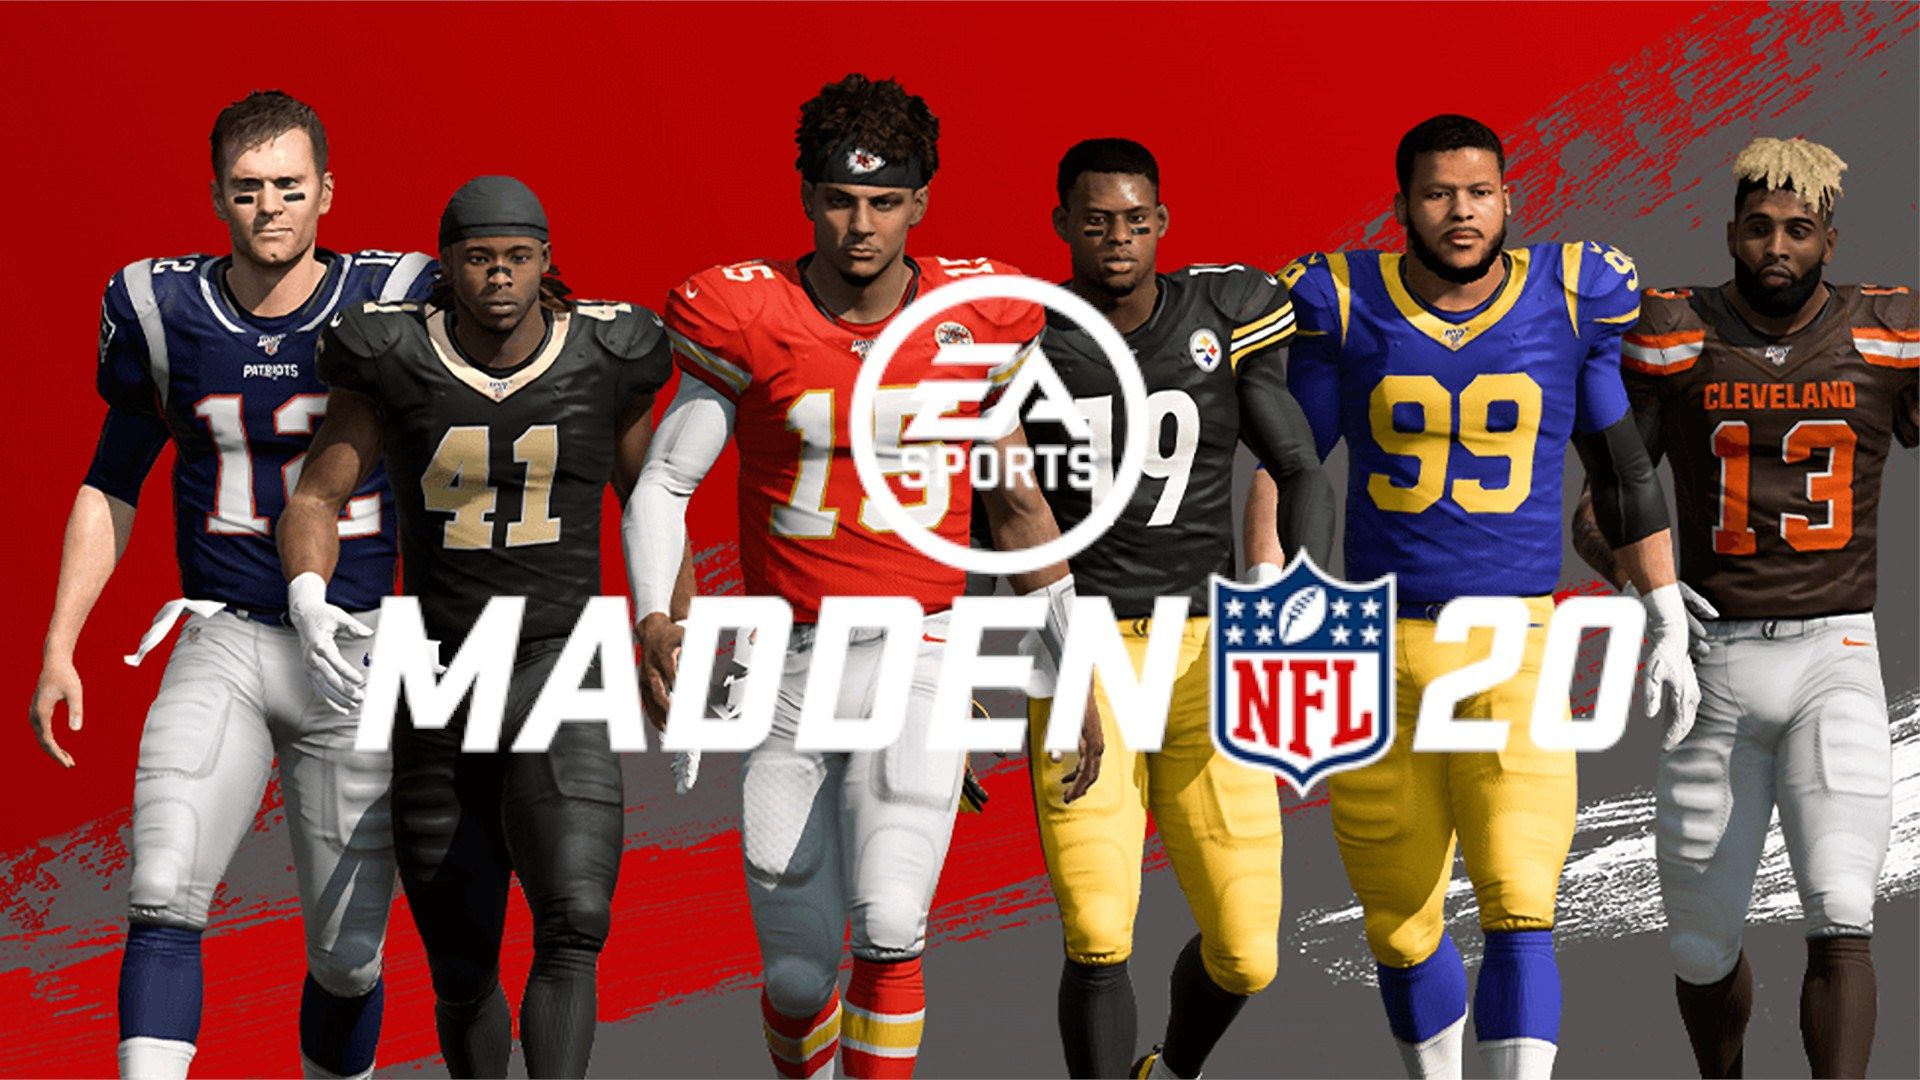 Madden NFL Wallpapers